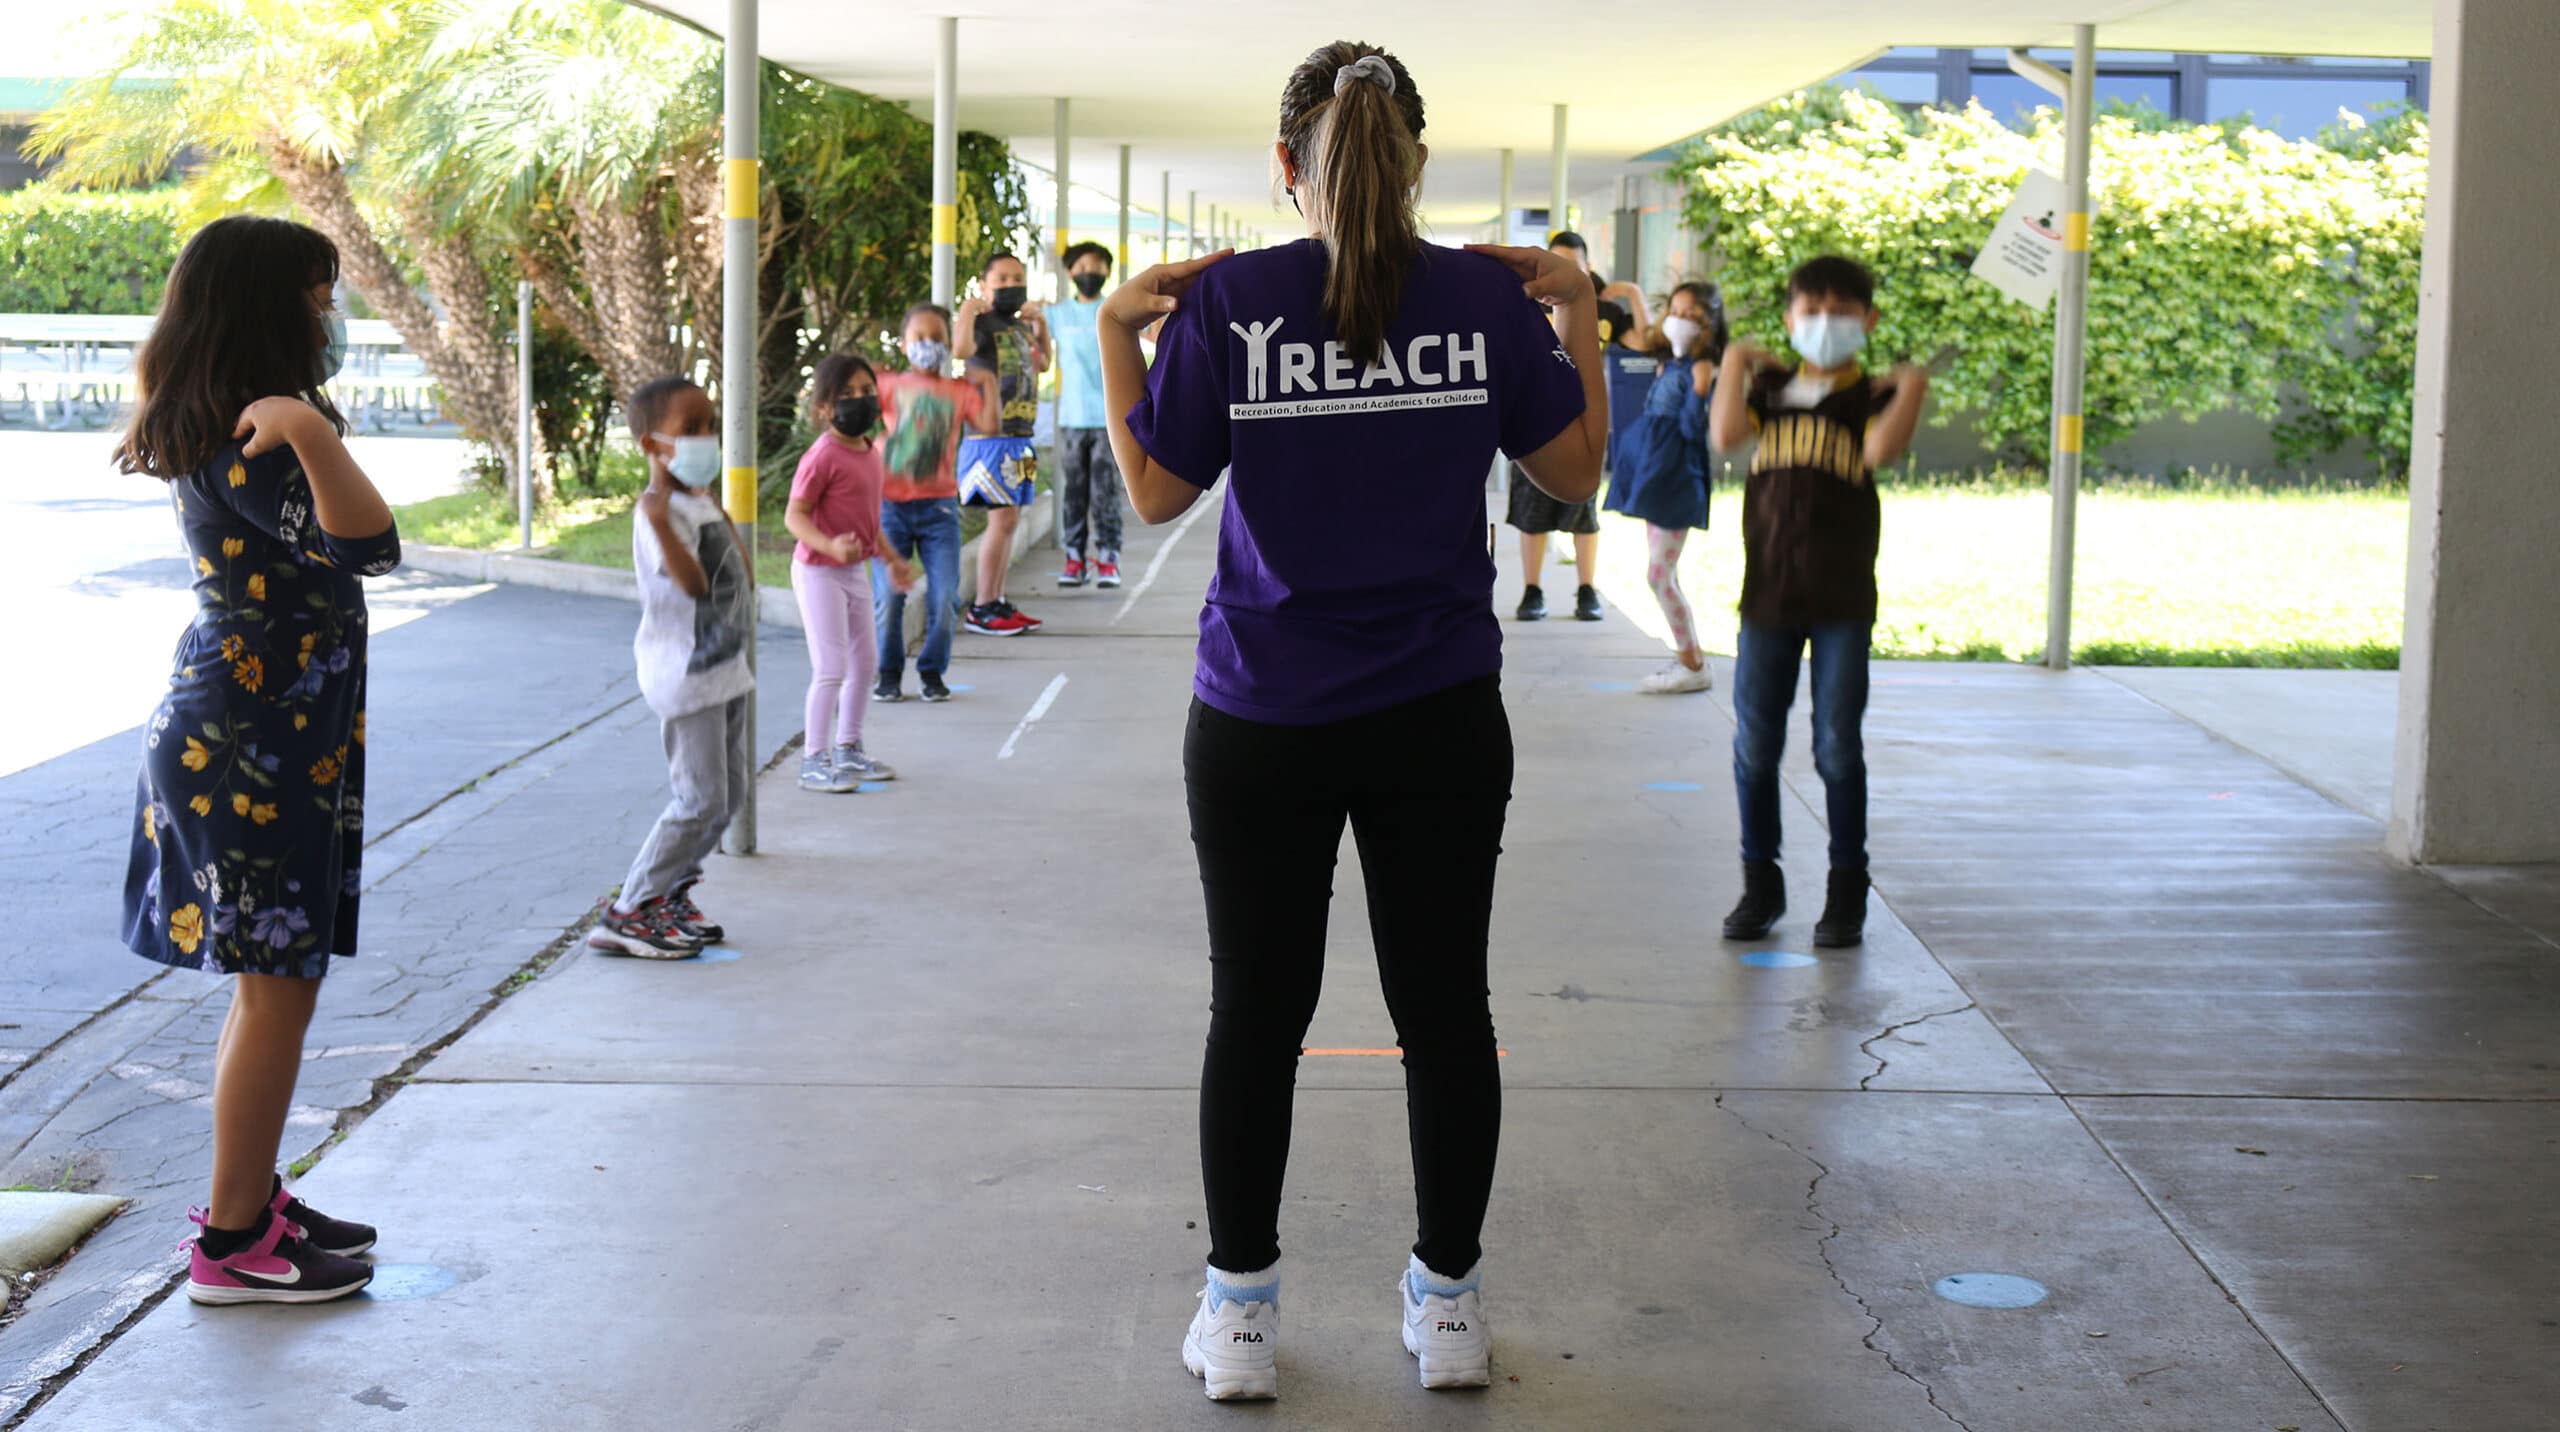 Woman wearing "Y Reach" tee leading activity outside with children